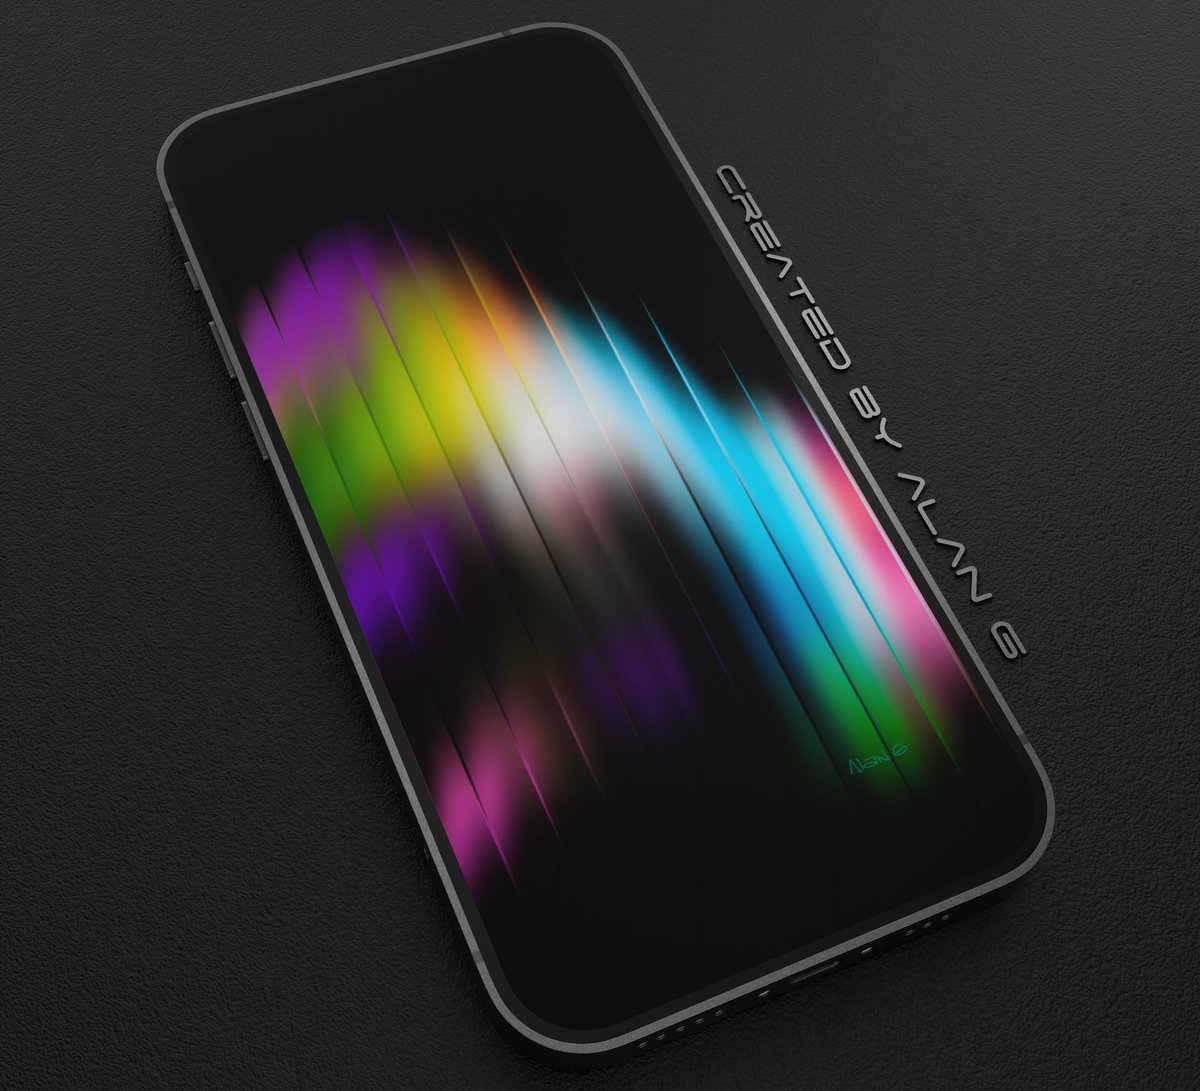 Amoled wallpaper
t.me/G_Walls/6132

#free #abstract #abstractart #amoled #3d #wallpaper #IphoneWallpaper #ios #ios16 #ios17 #pixel #android #android15 #telegram #telegramchannel